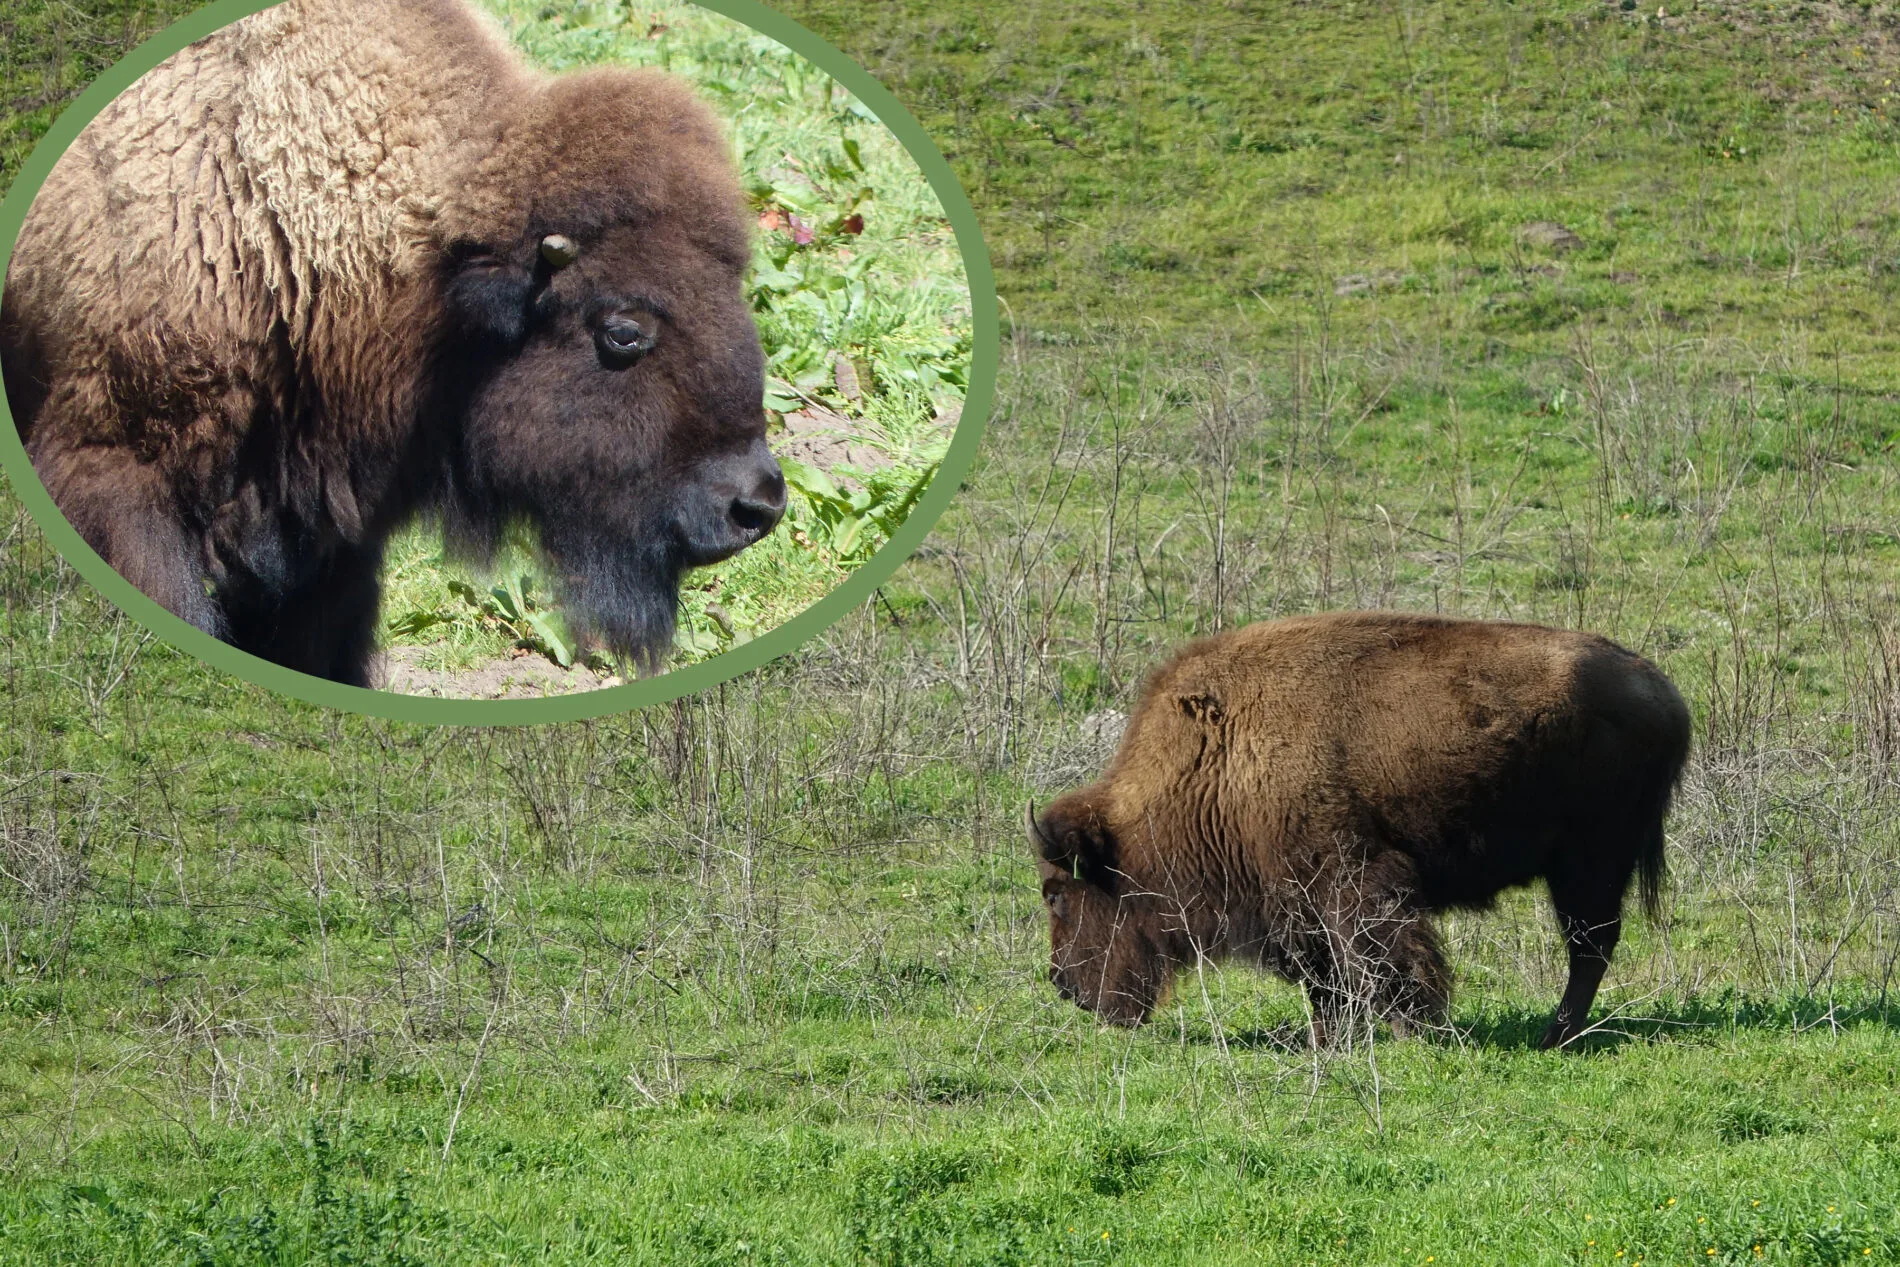 The Bison Paddock in Golden Gate Park has been home to a small herd since 1892.